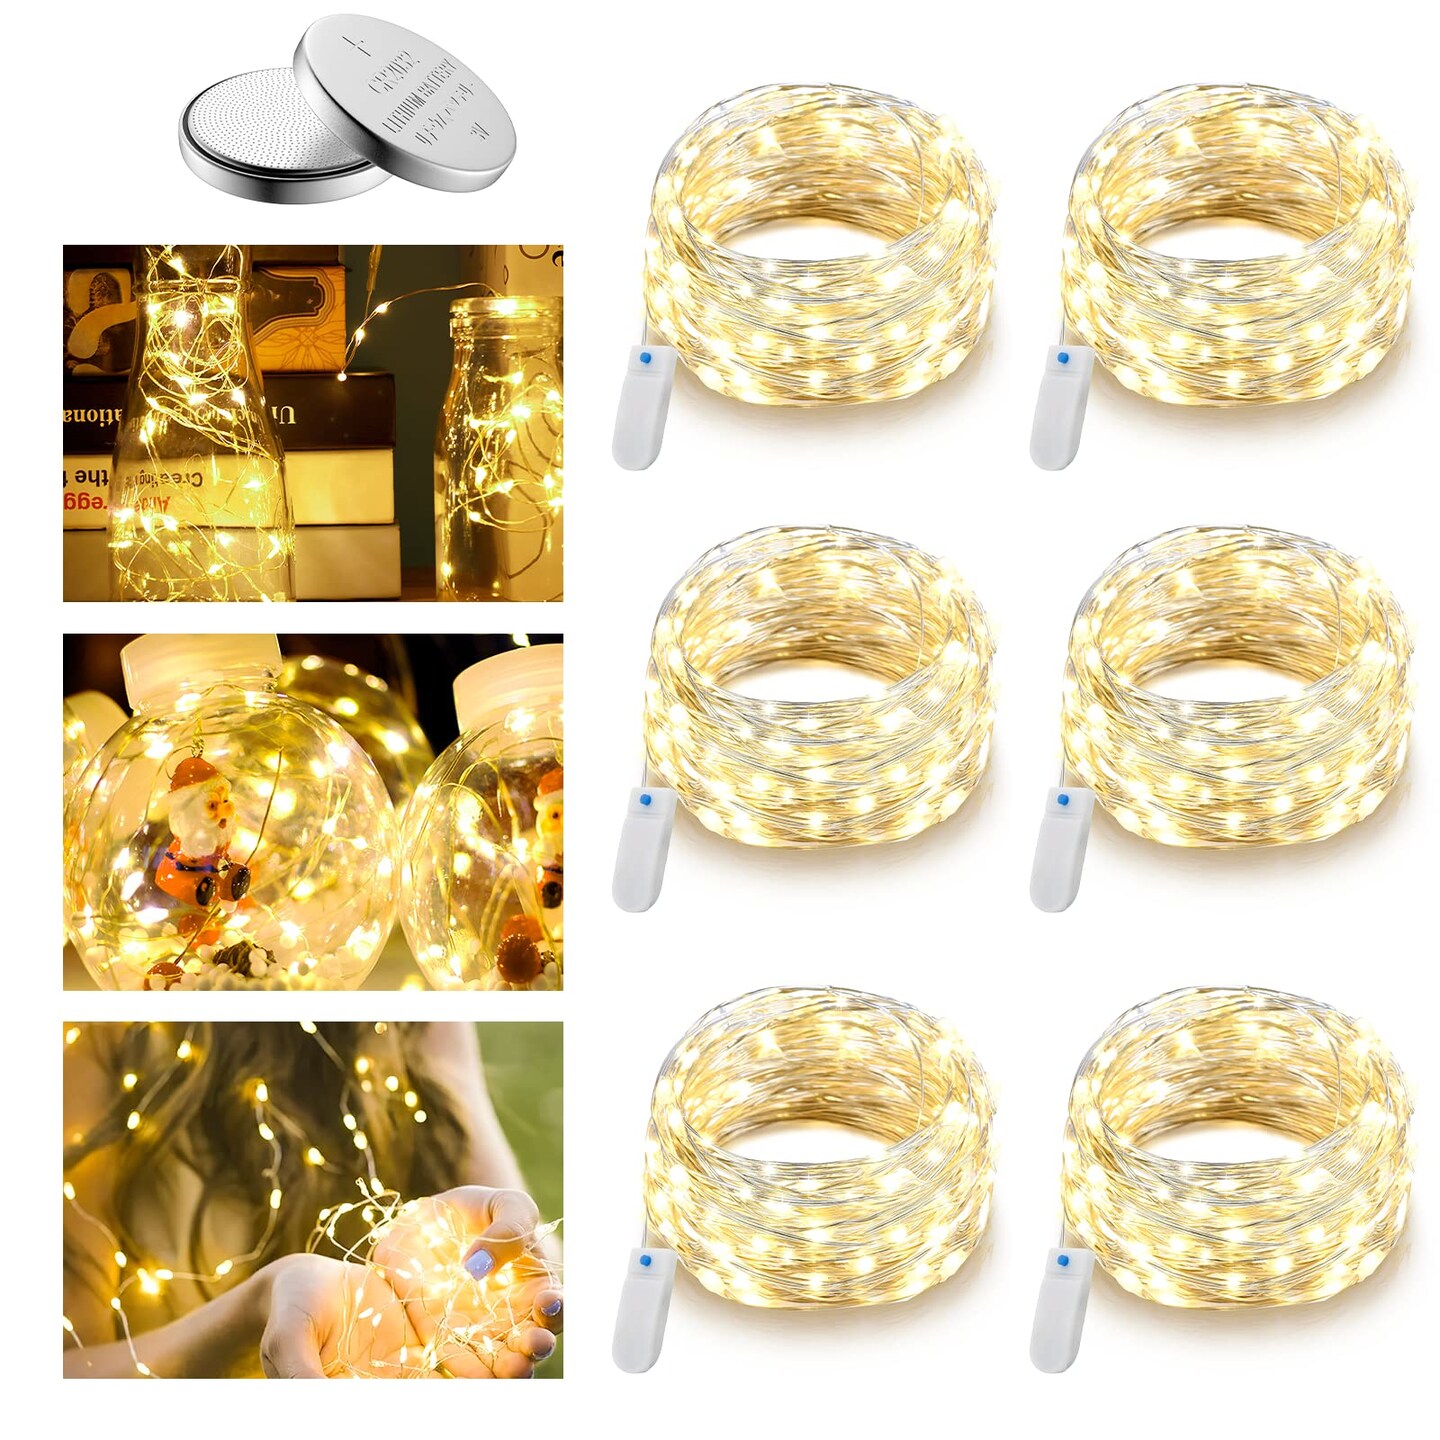 6 pack 30 LED Warm White Battery Operated Fairy Lights 10&#x27;Long | Batteries Included | Great for Mason Jars, Holiday Projects etc